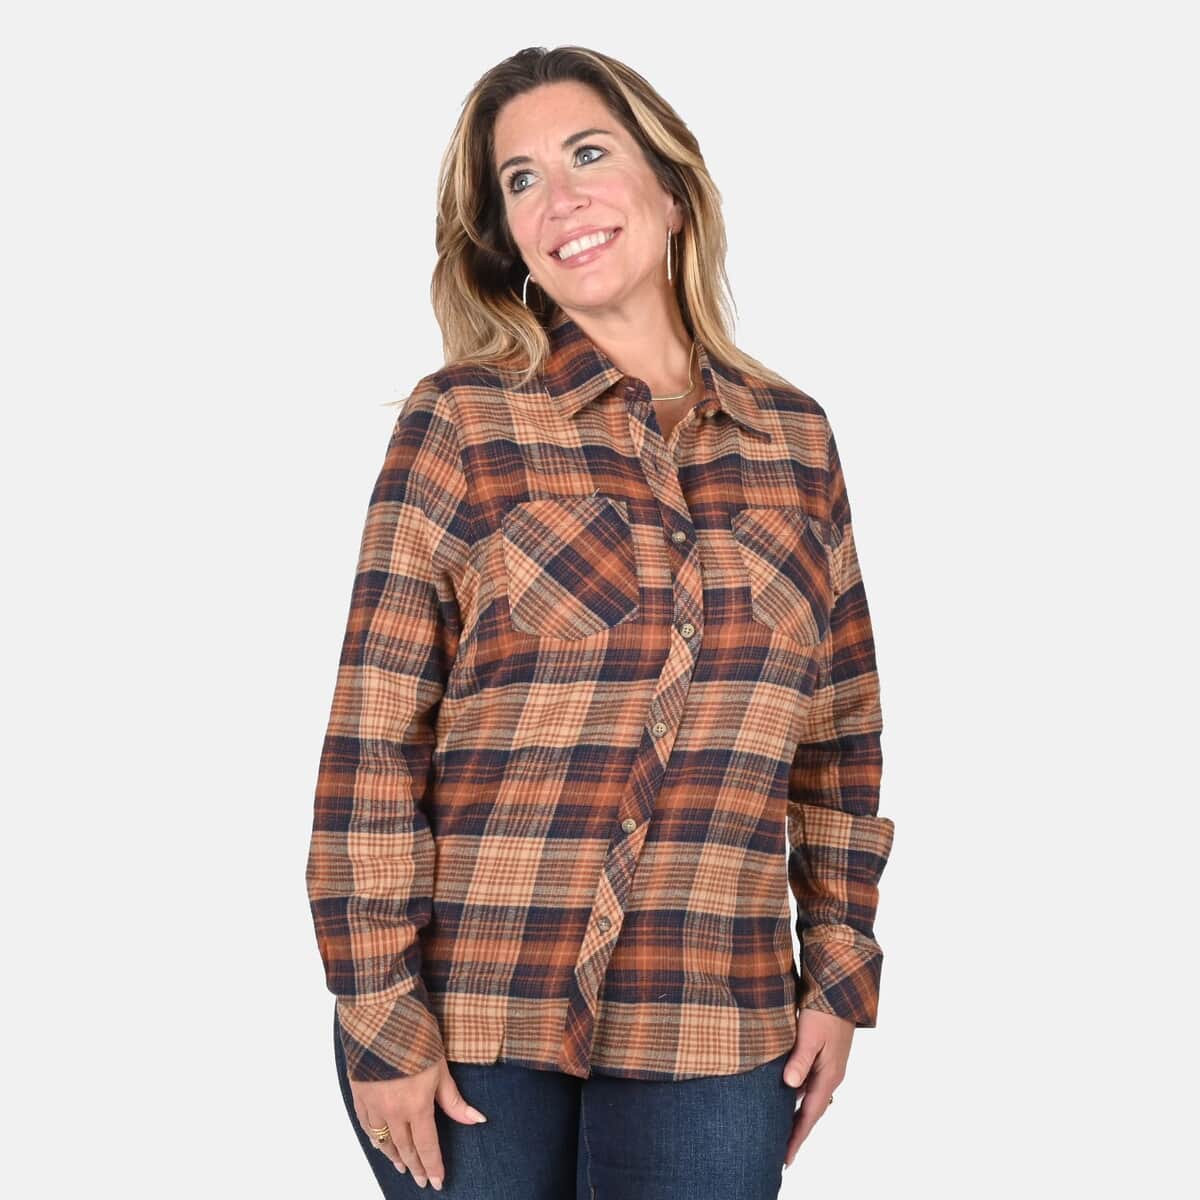 Victory Sportswear Tan and Black Plaid Pattern Cotton Flannel Shirt - S image number 3